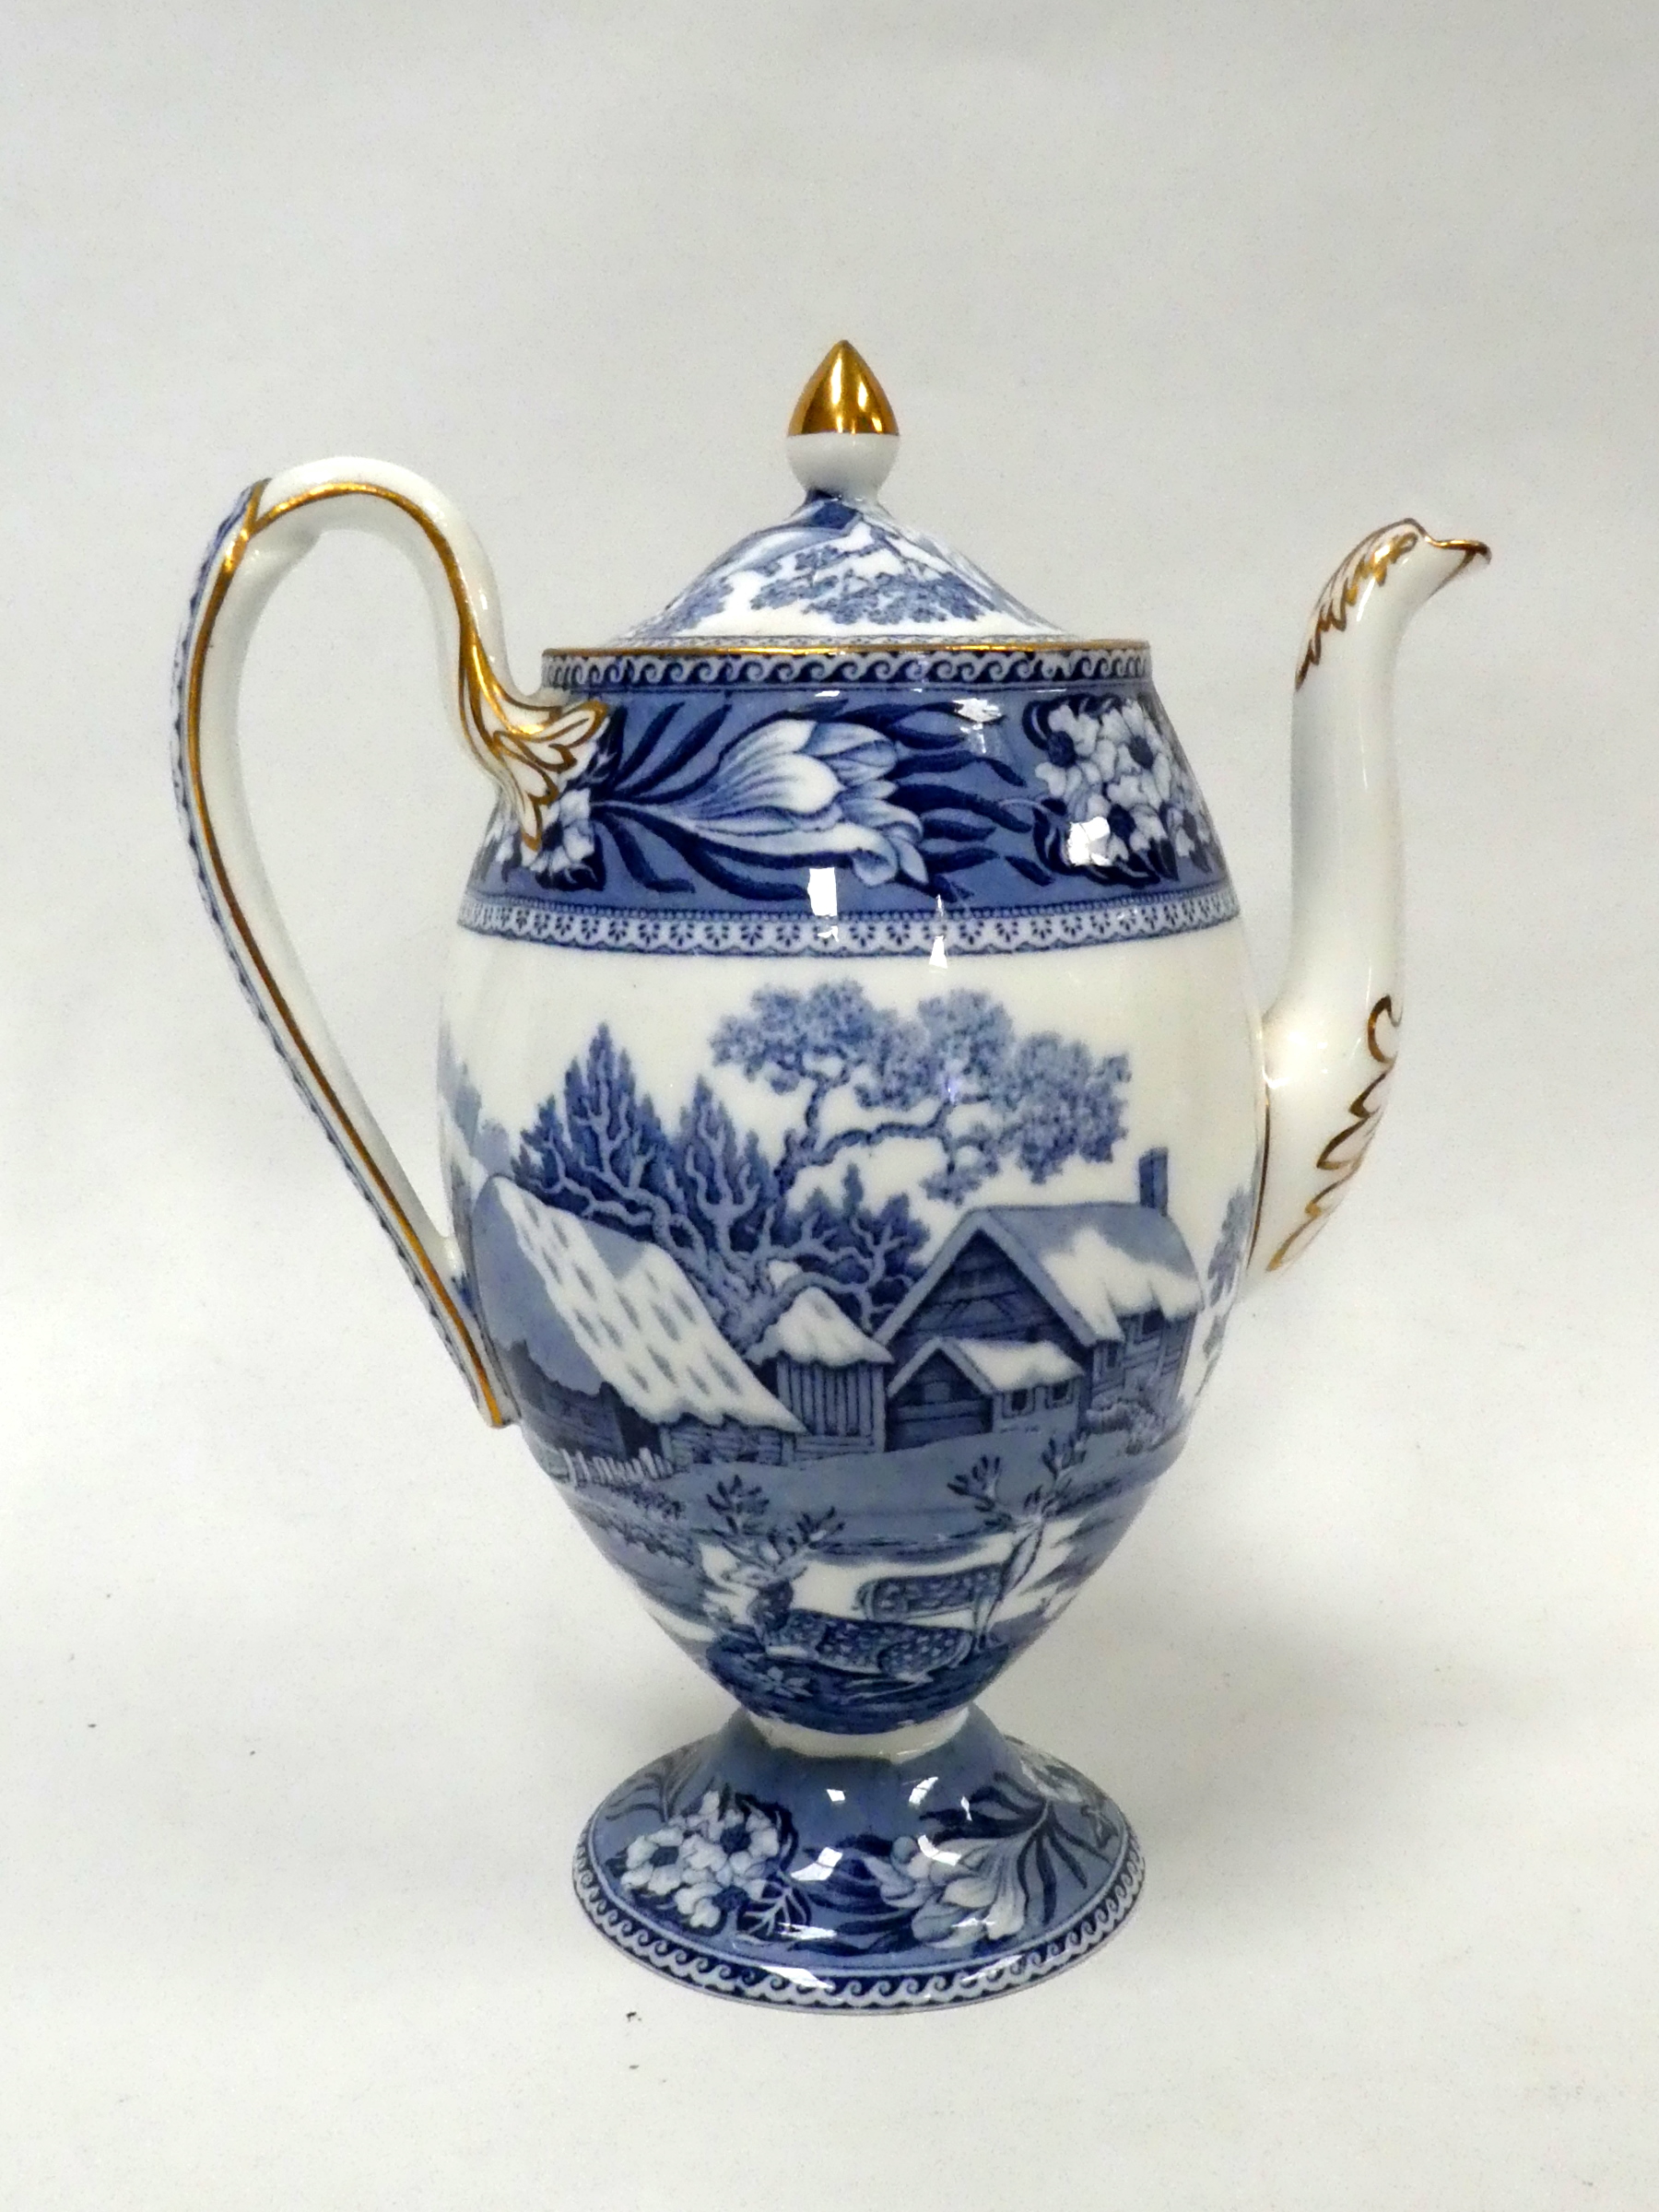 A Wedgwood coffee service for six - blue and white decorated with bucolic scenes, comprising six - Image 2 of 6